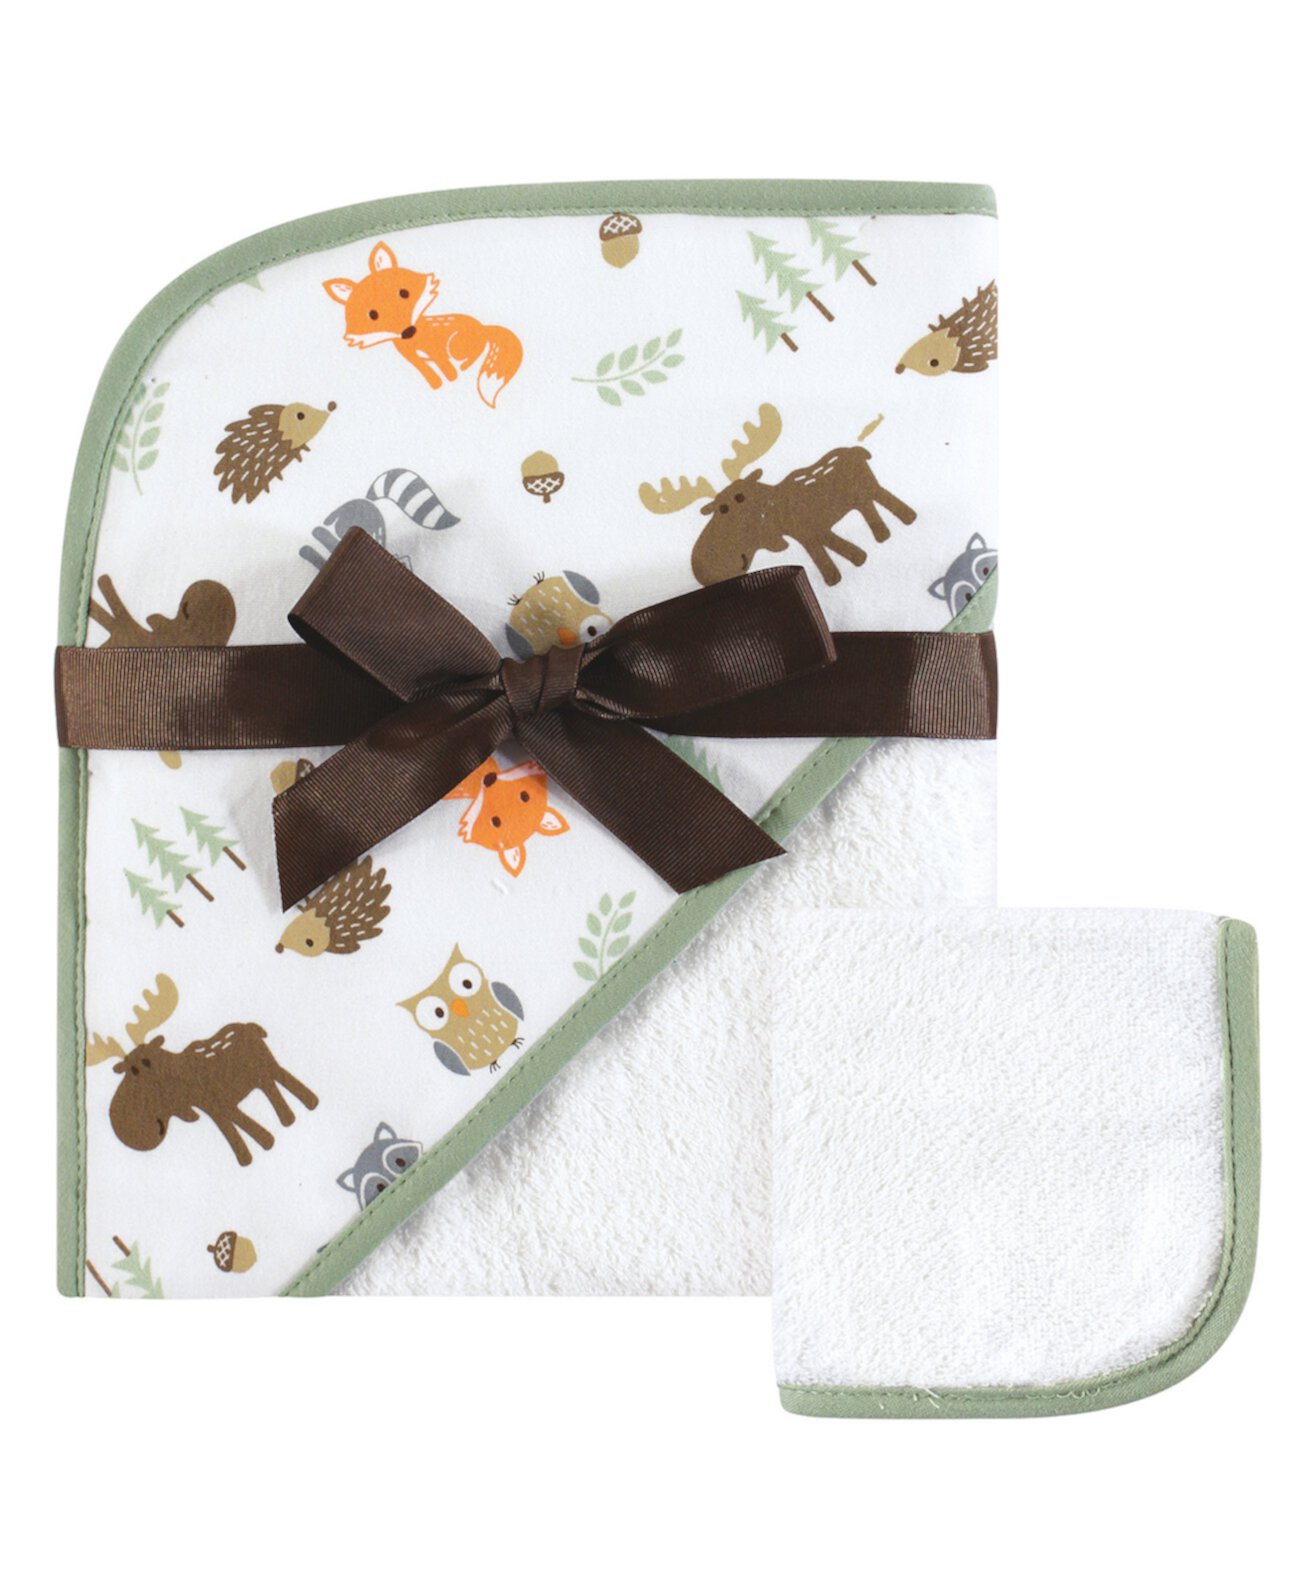 Hudson Baby Unisex Baby Hooded Towel and Washcloth, Woodland 2-Piece Set, One Size Baby Vision